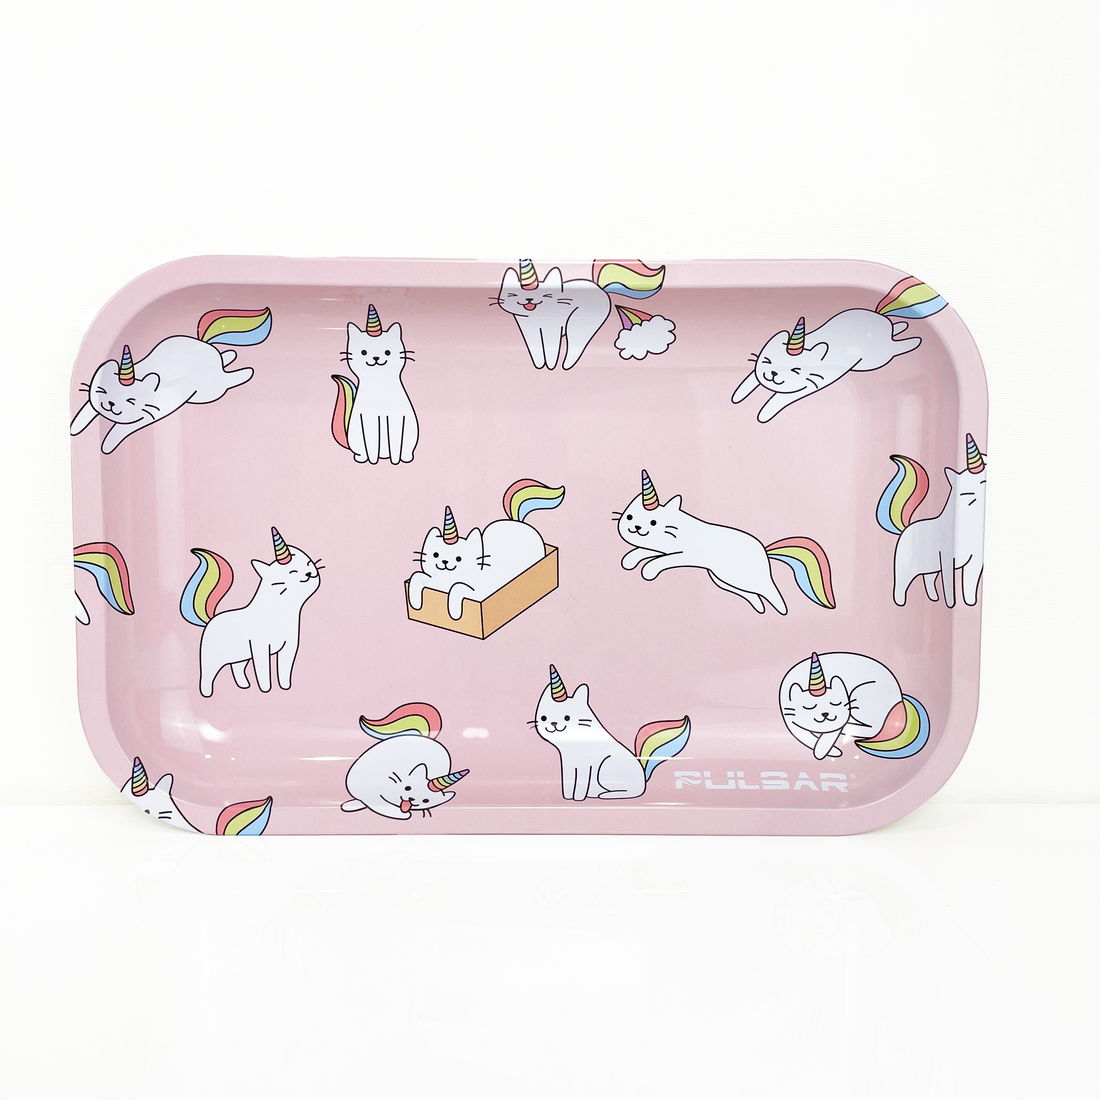 Pulsar Caticorn pink metal rolling tray bliss shop chicago